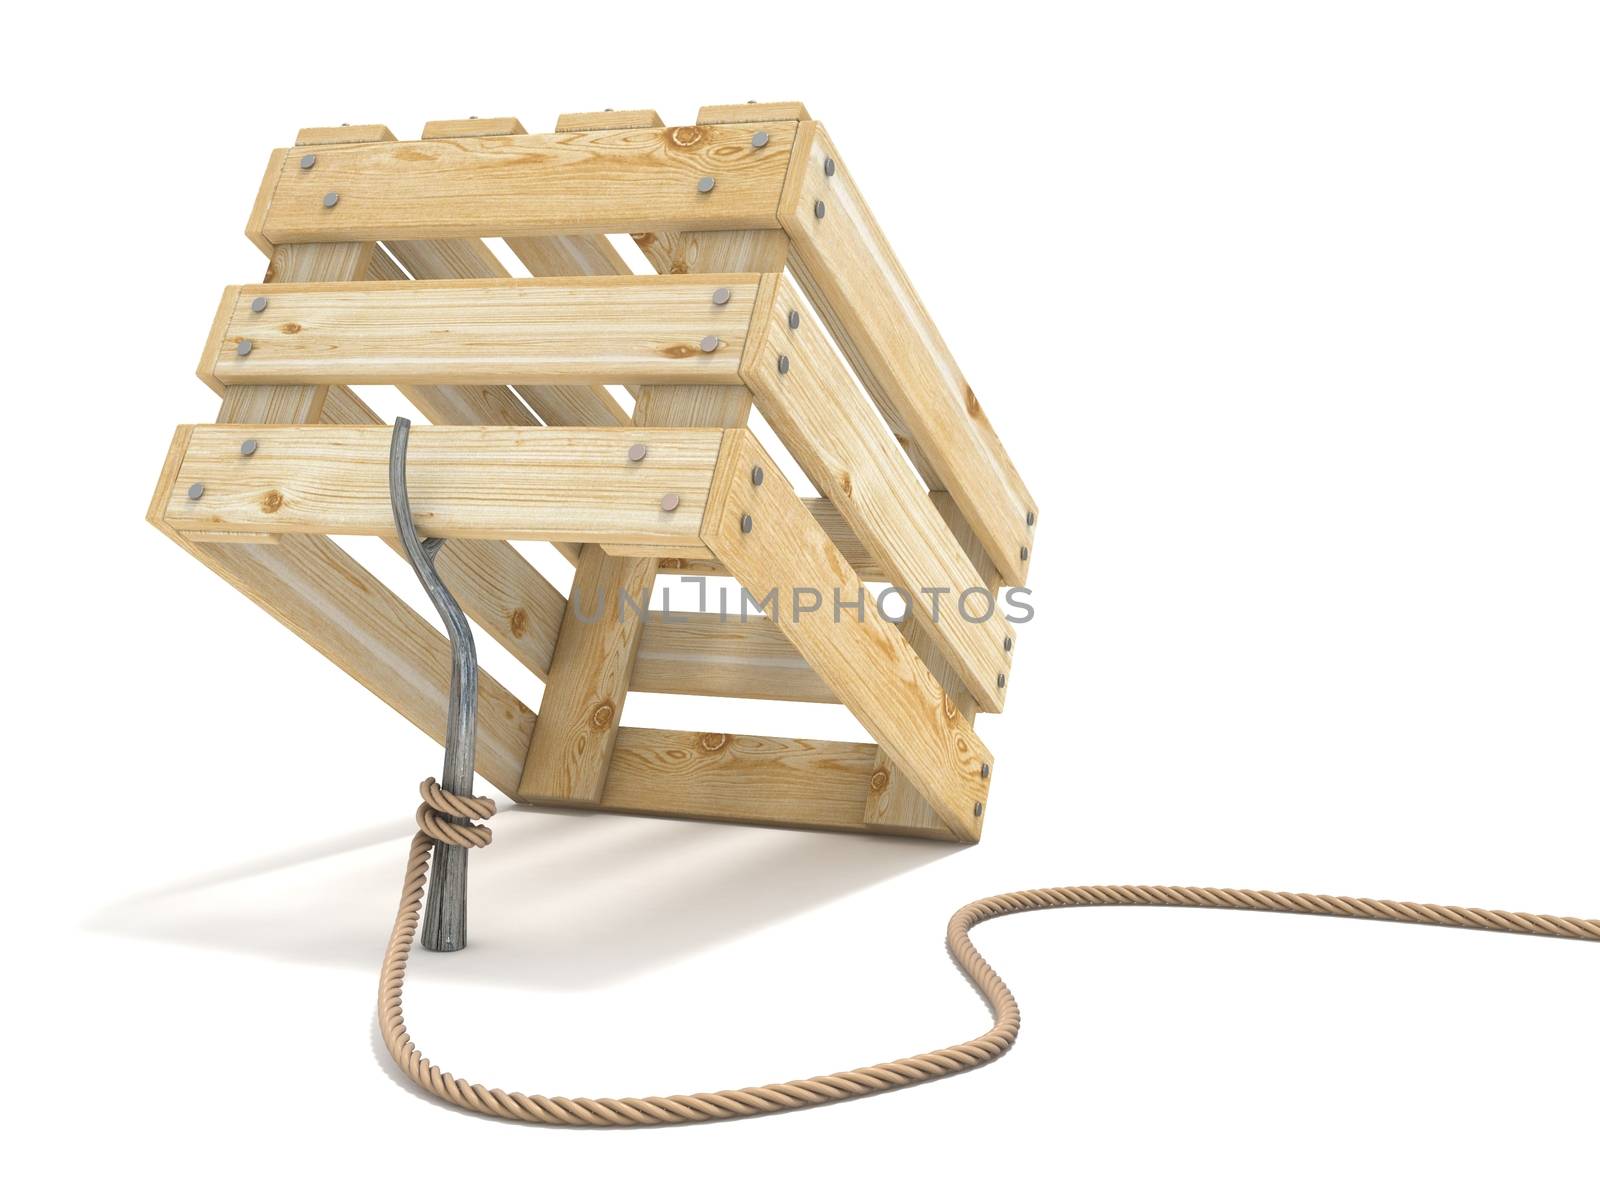 Trap made of wooden crate and rope tide to stick 3D by djmilic